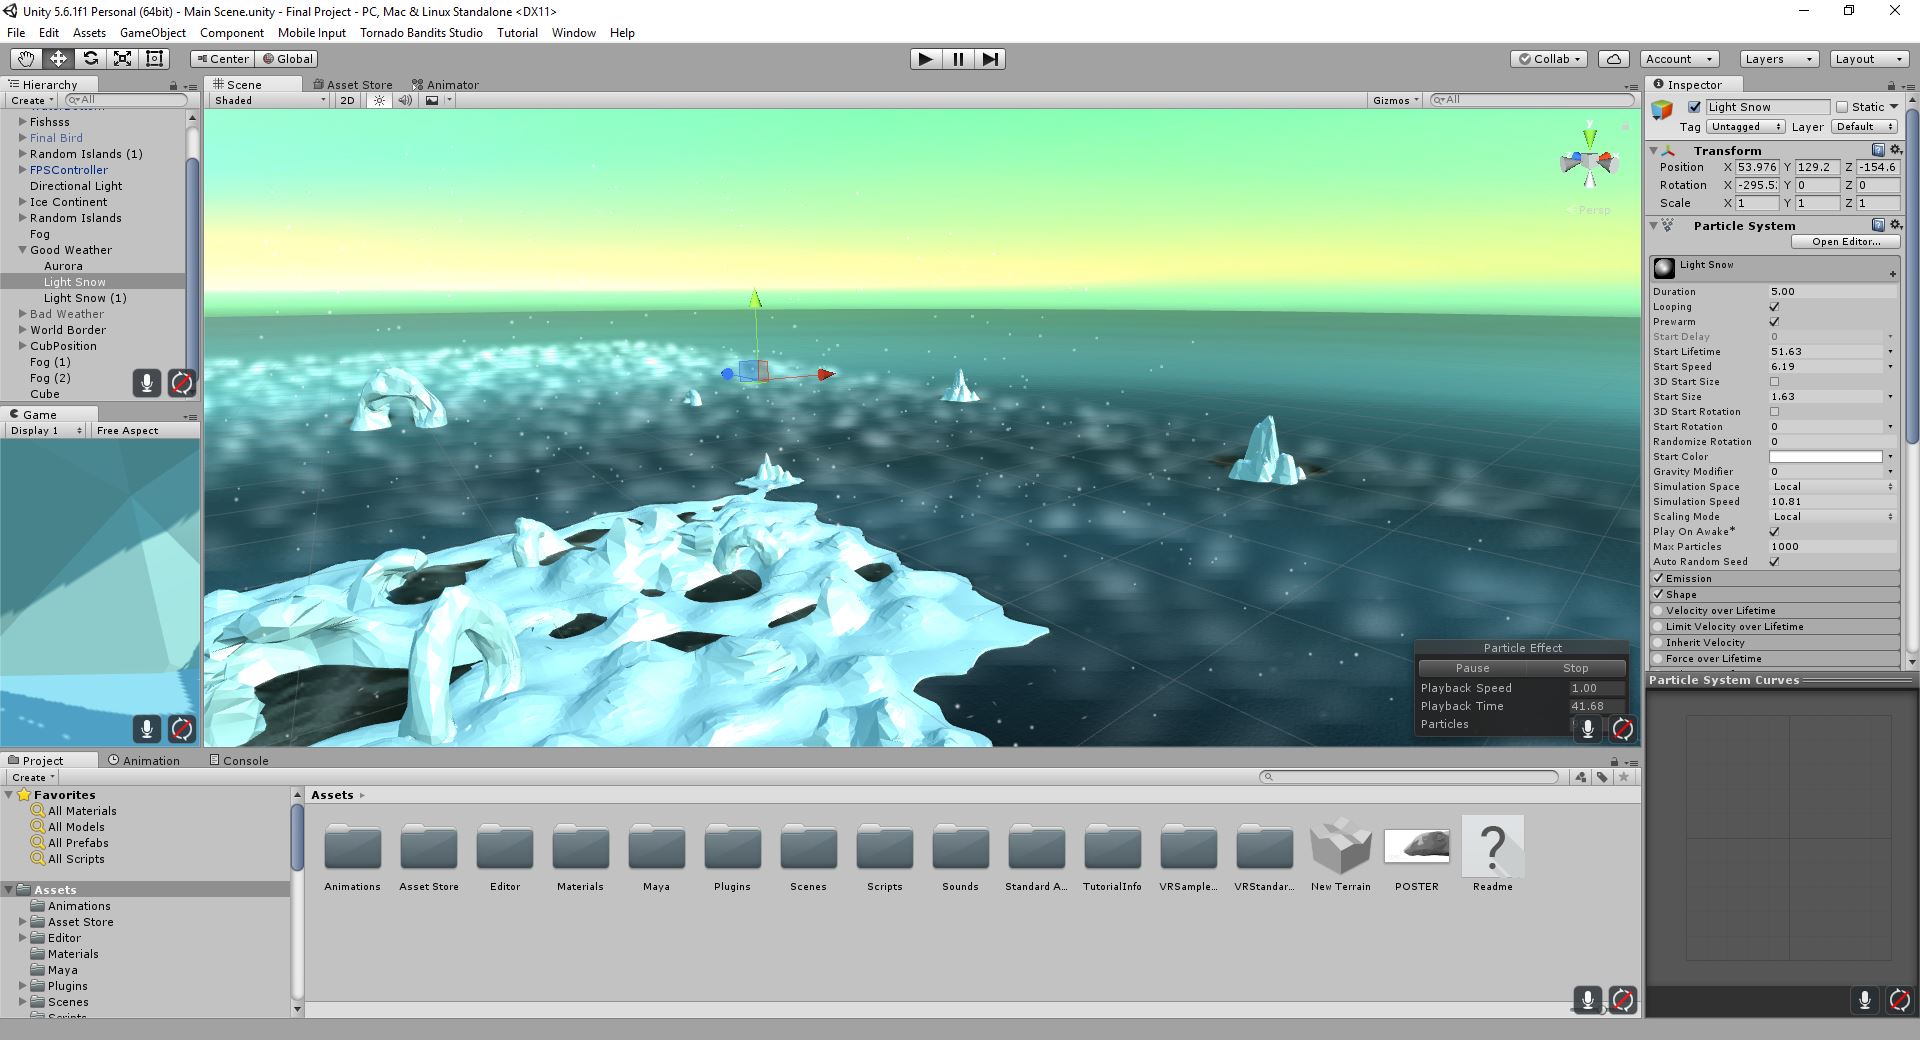 a screenshot of Jameson's progress in creating the snow fall and lighting, while also showing the Unity User Interface